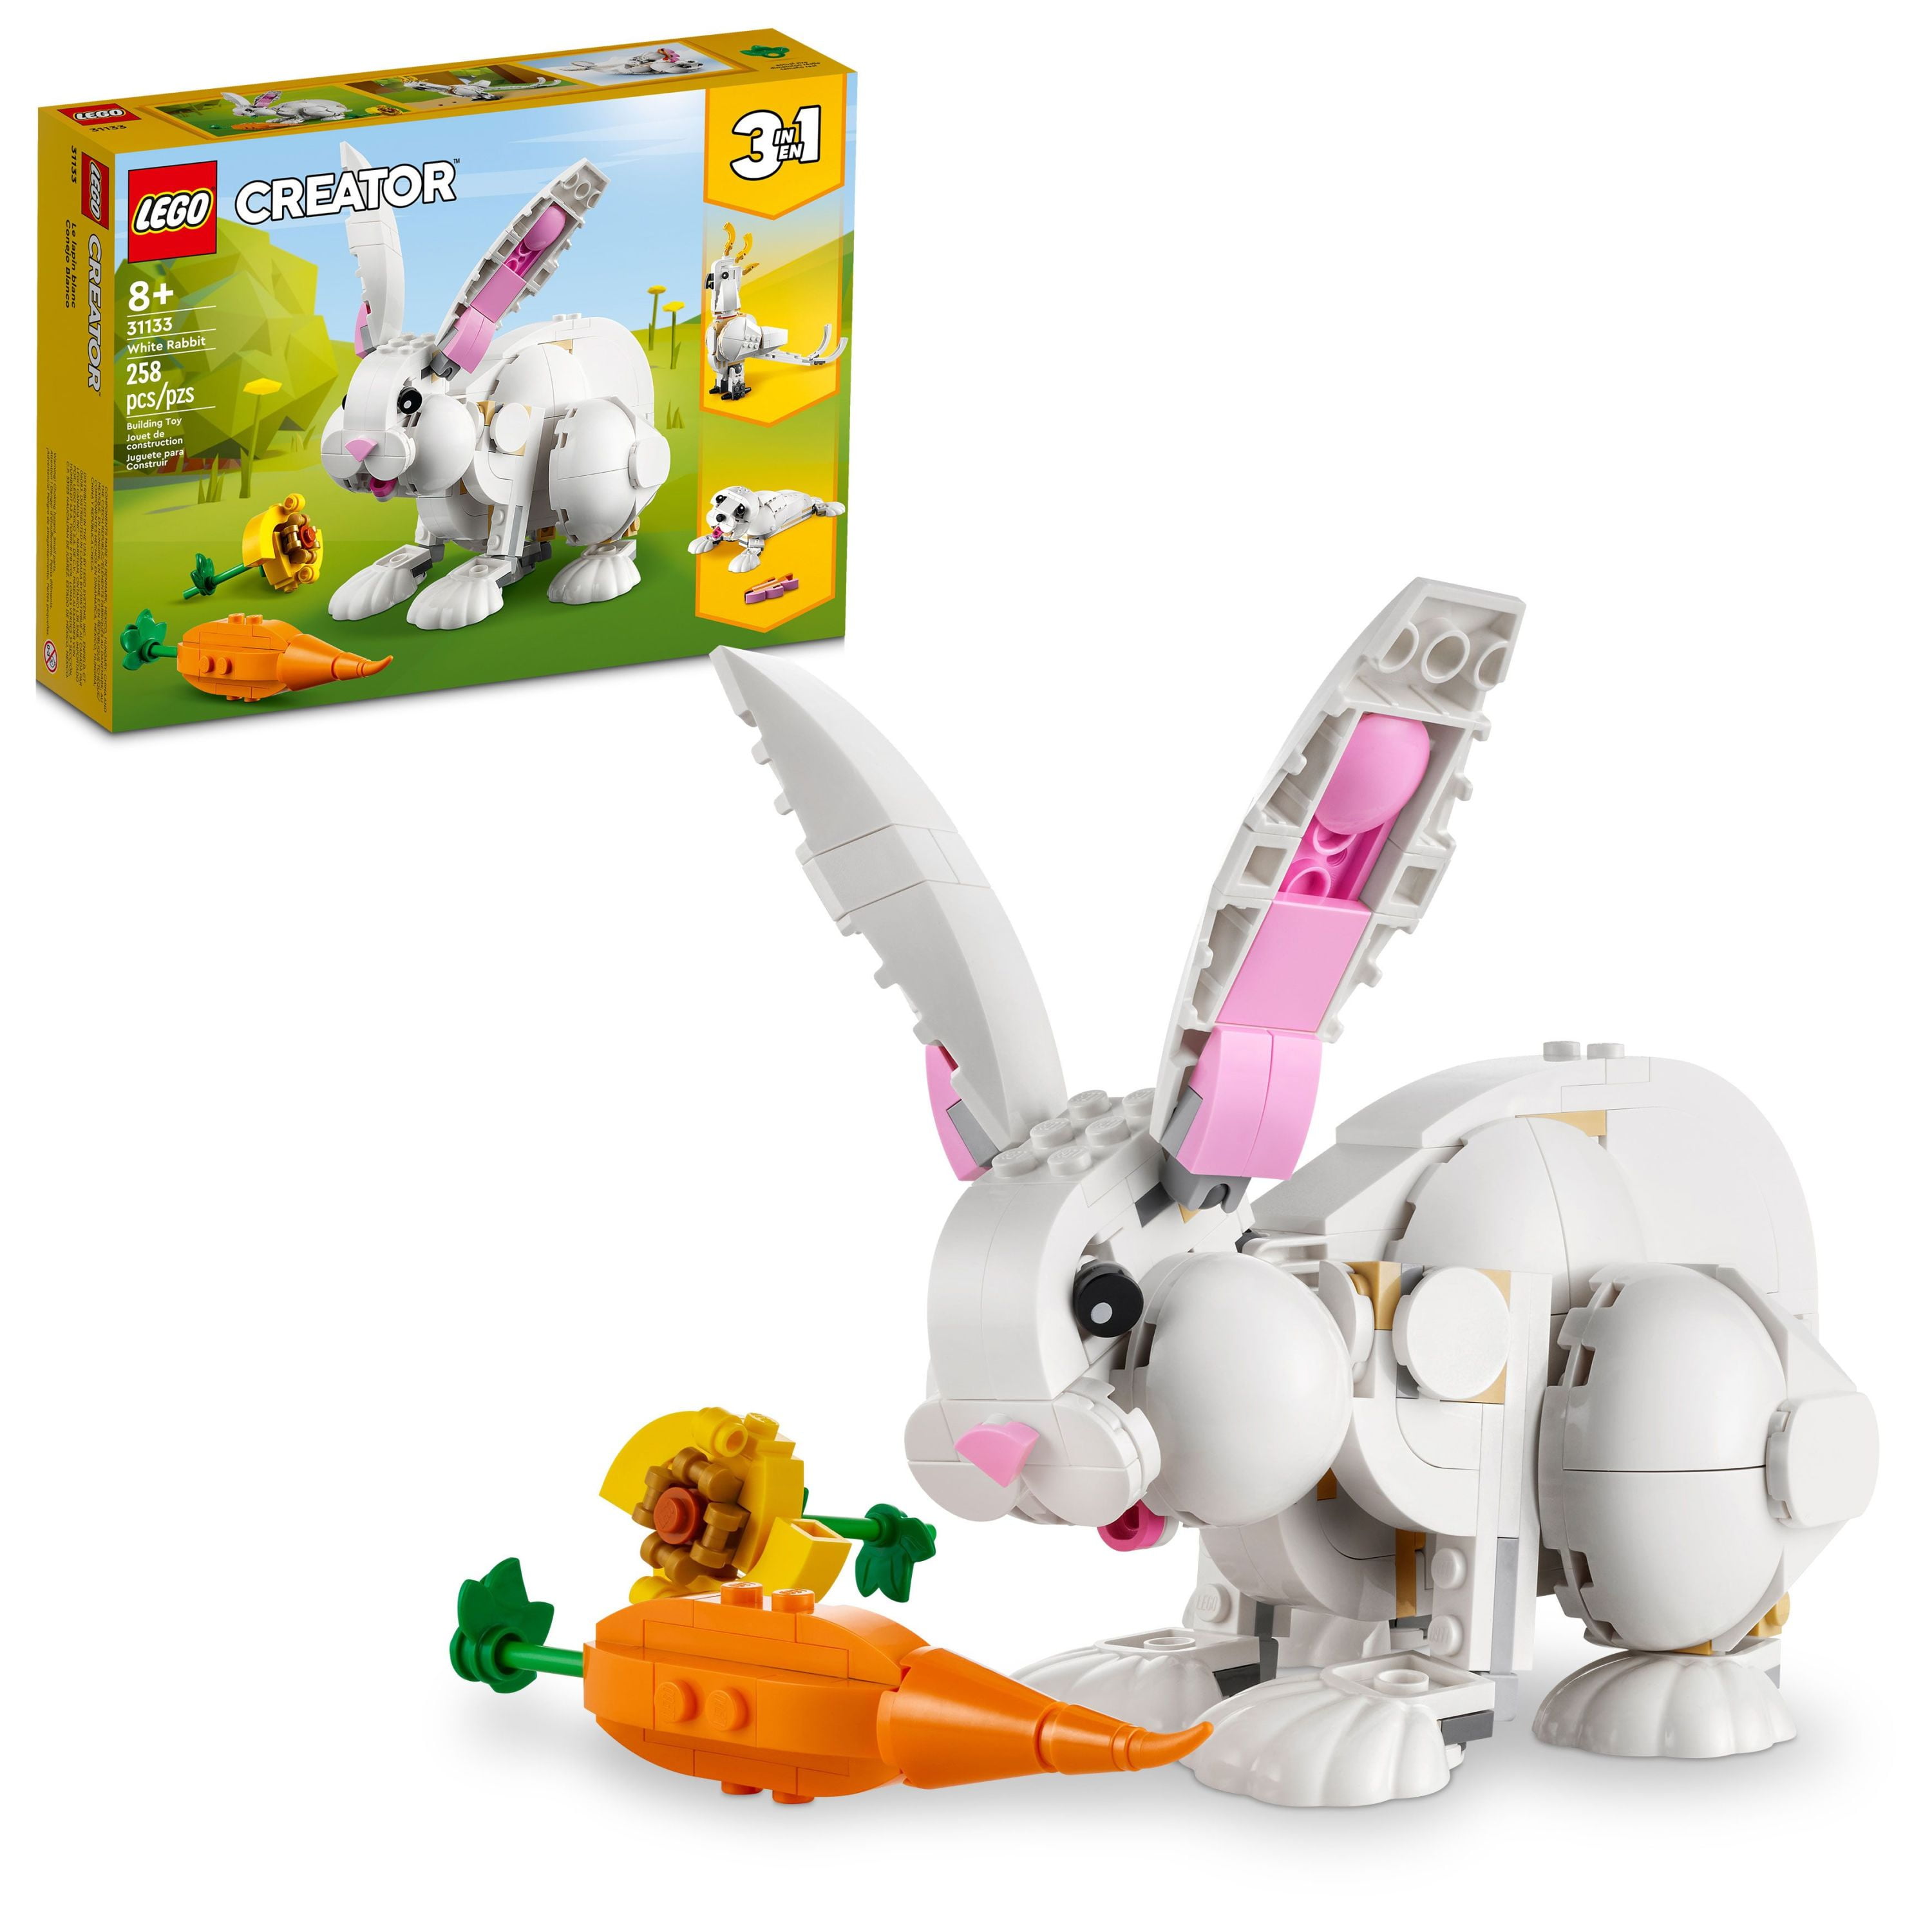 LEGO Creator 3in1 White Rabbit Animal Toy Building Set 31133, Bunny to Seal  and Parrot Figures, For Kids Ages 8 Plus Years Old